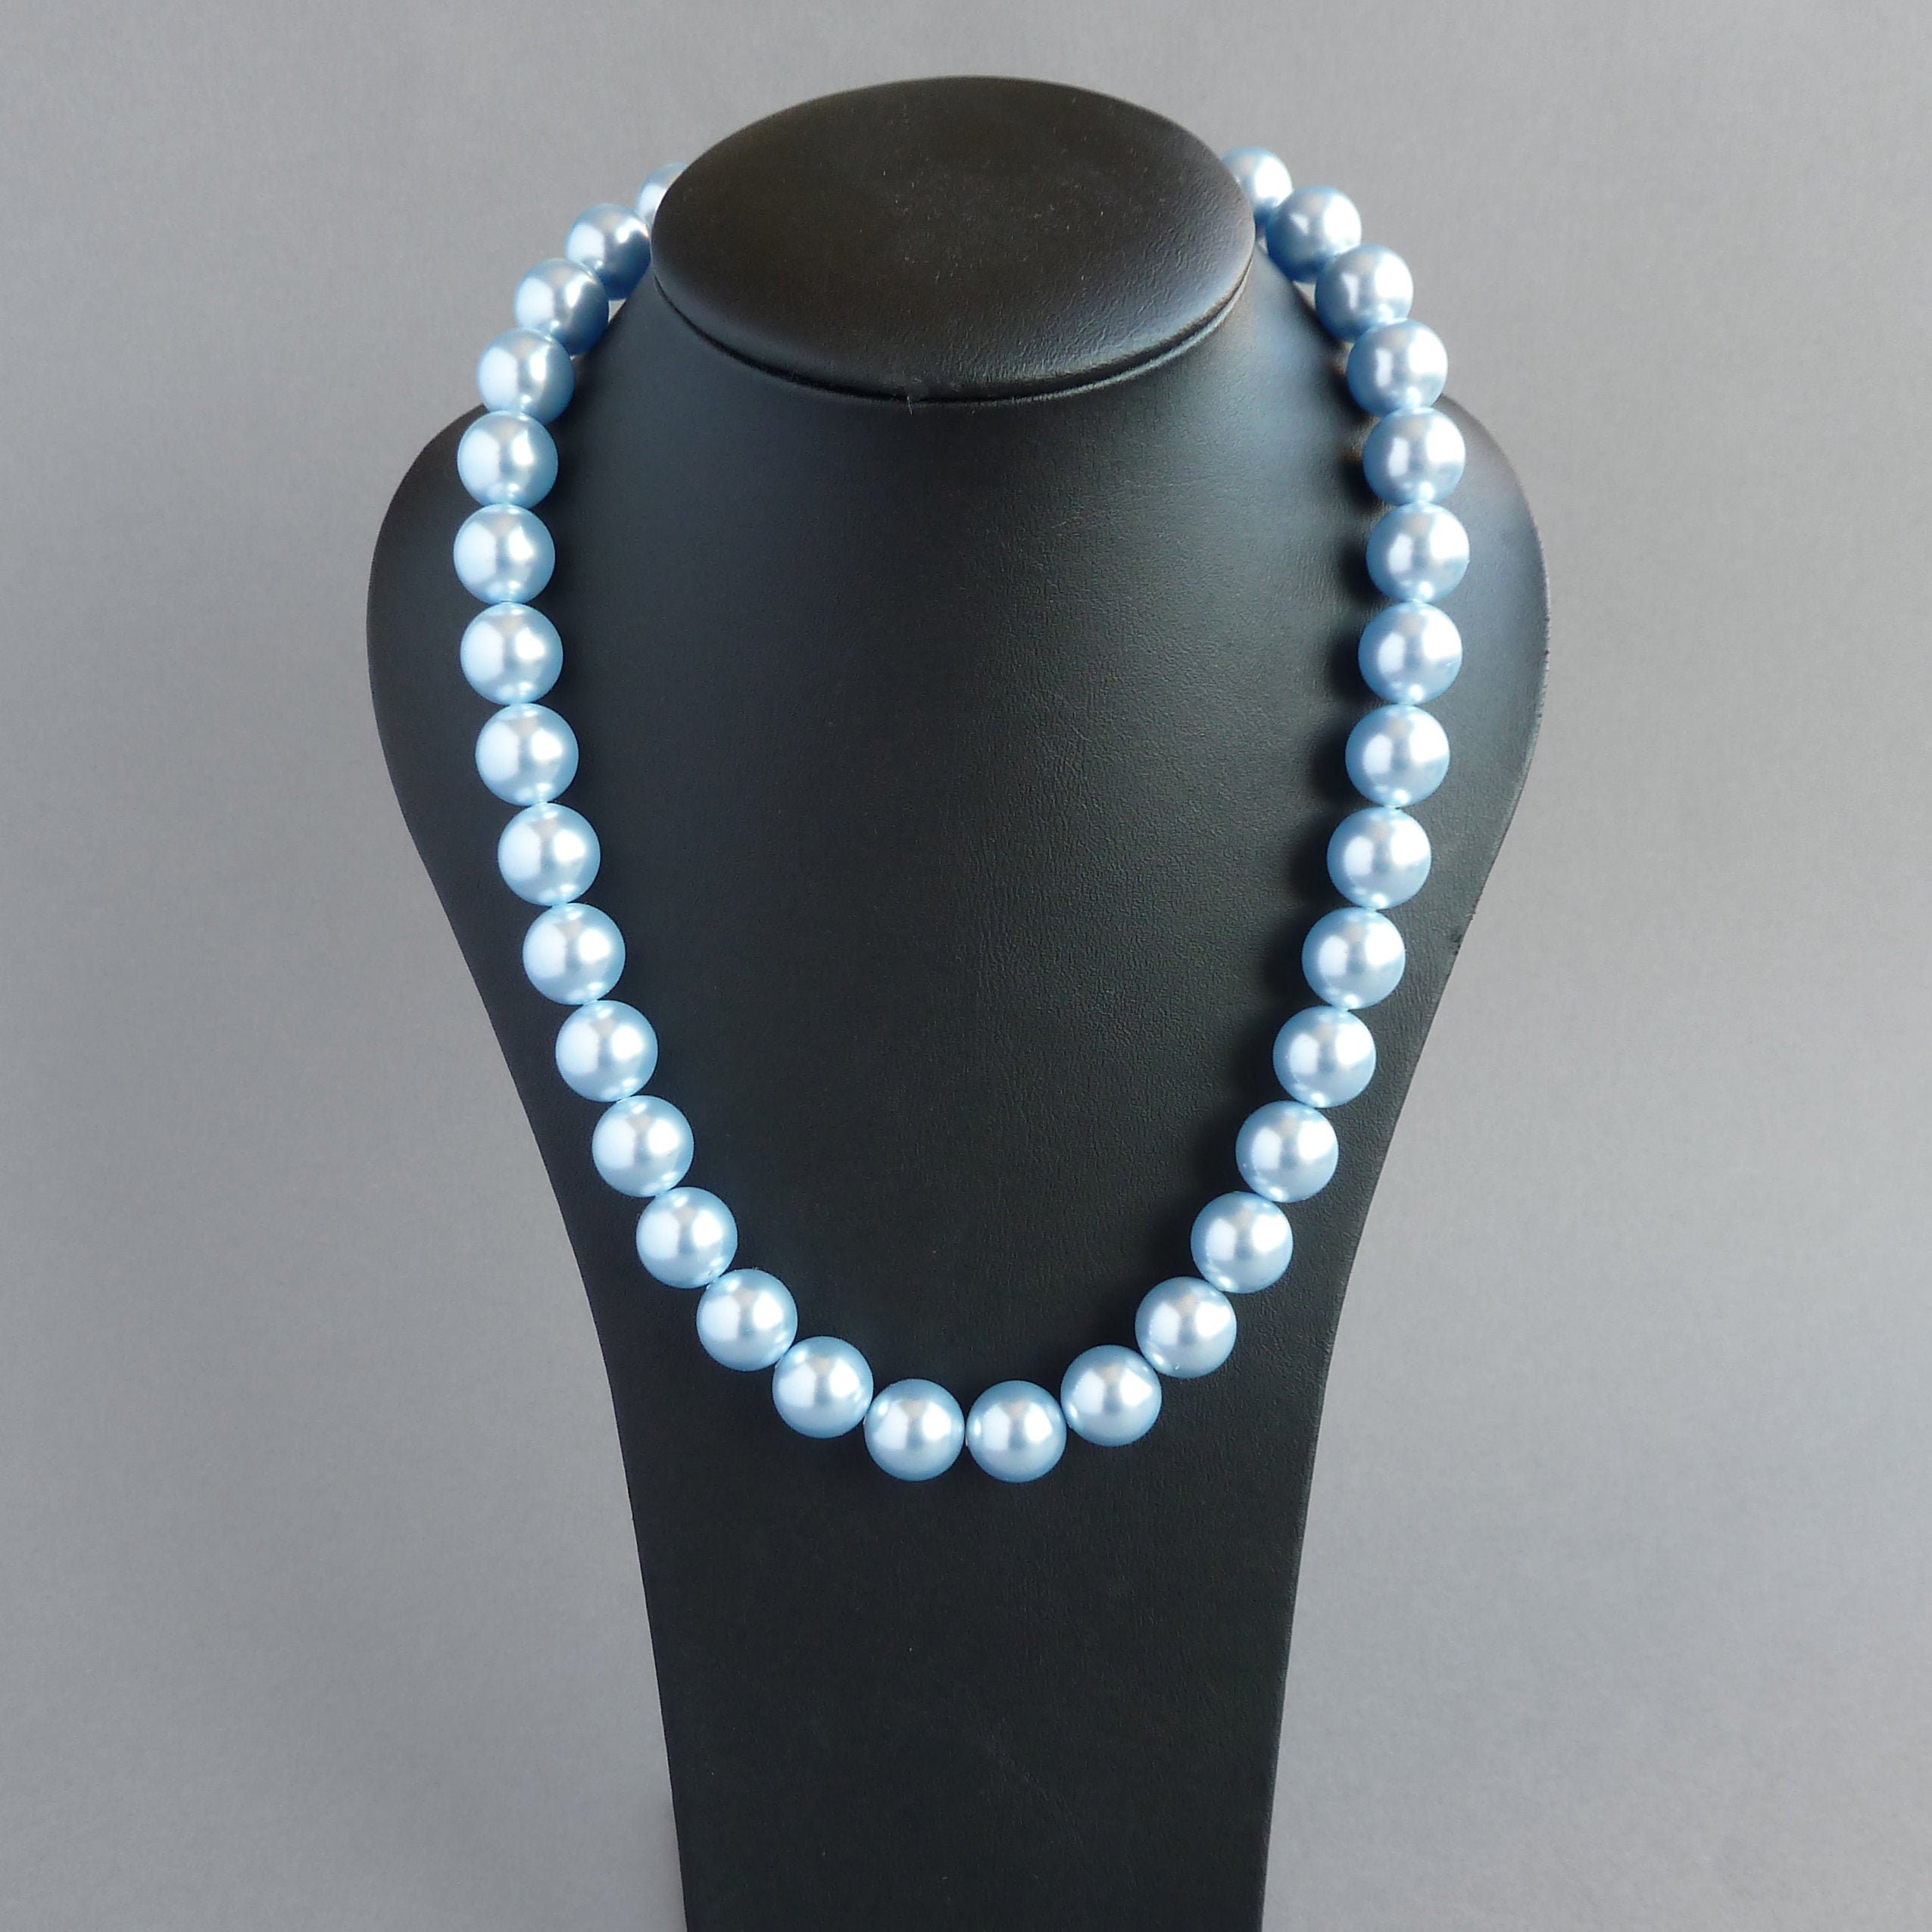 Aqua Blue Two Strand Faux Pearls Necklace